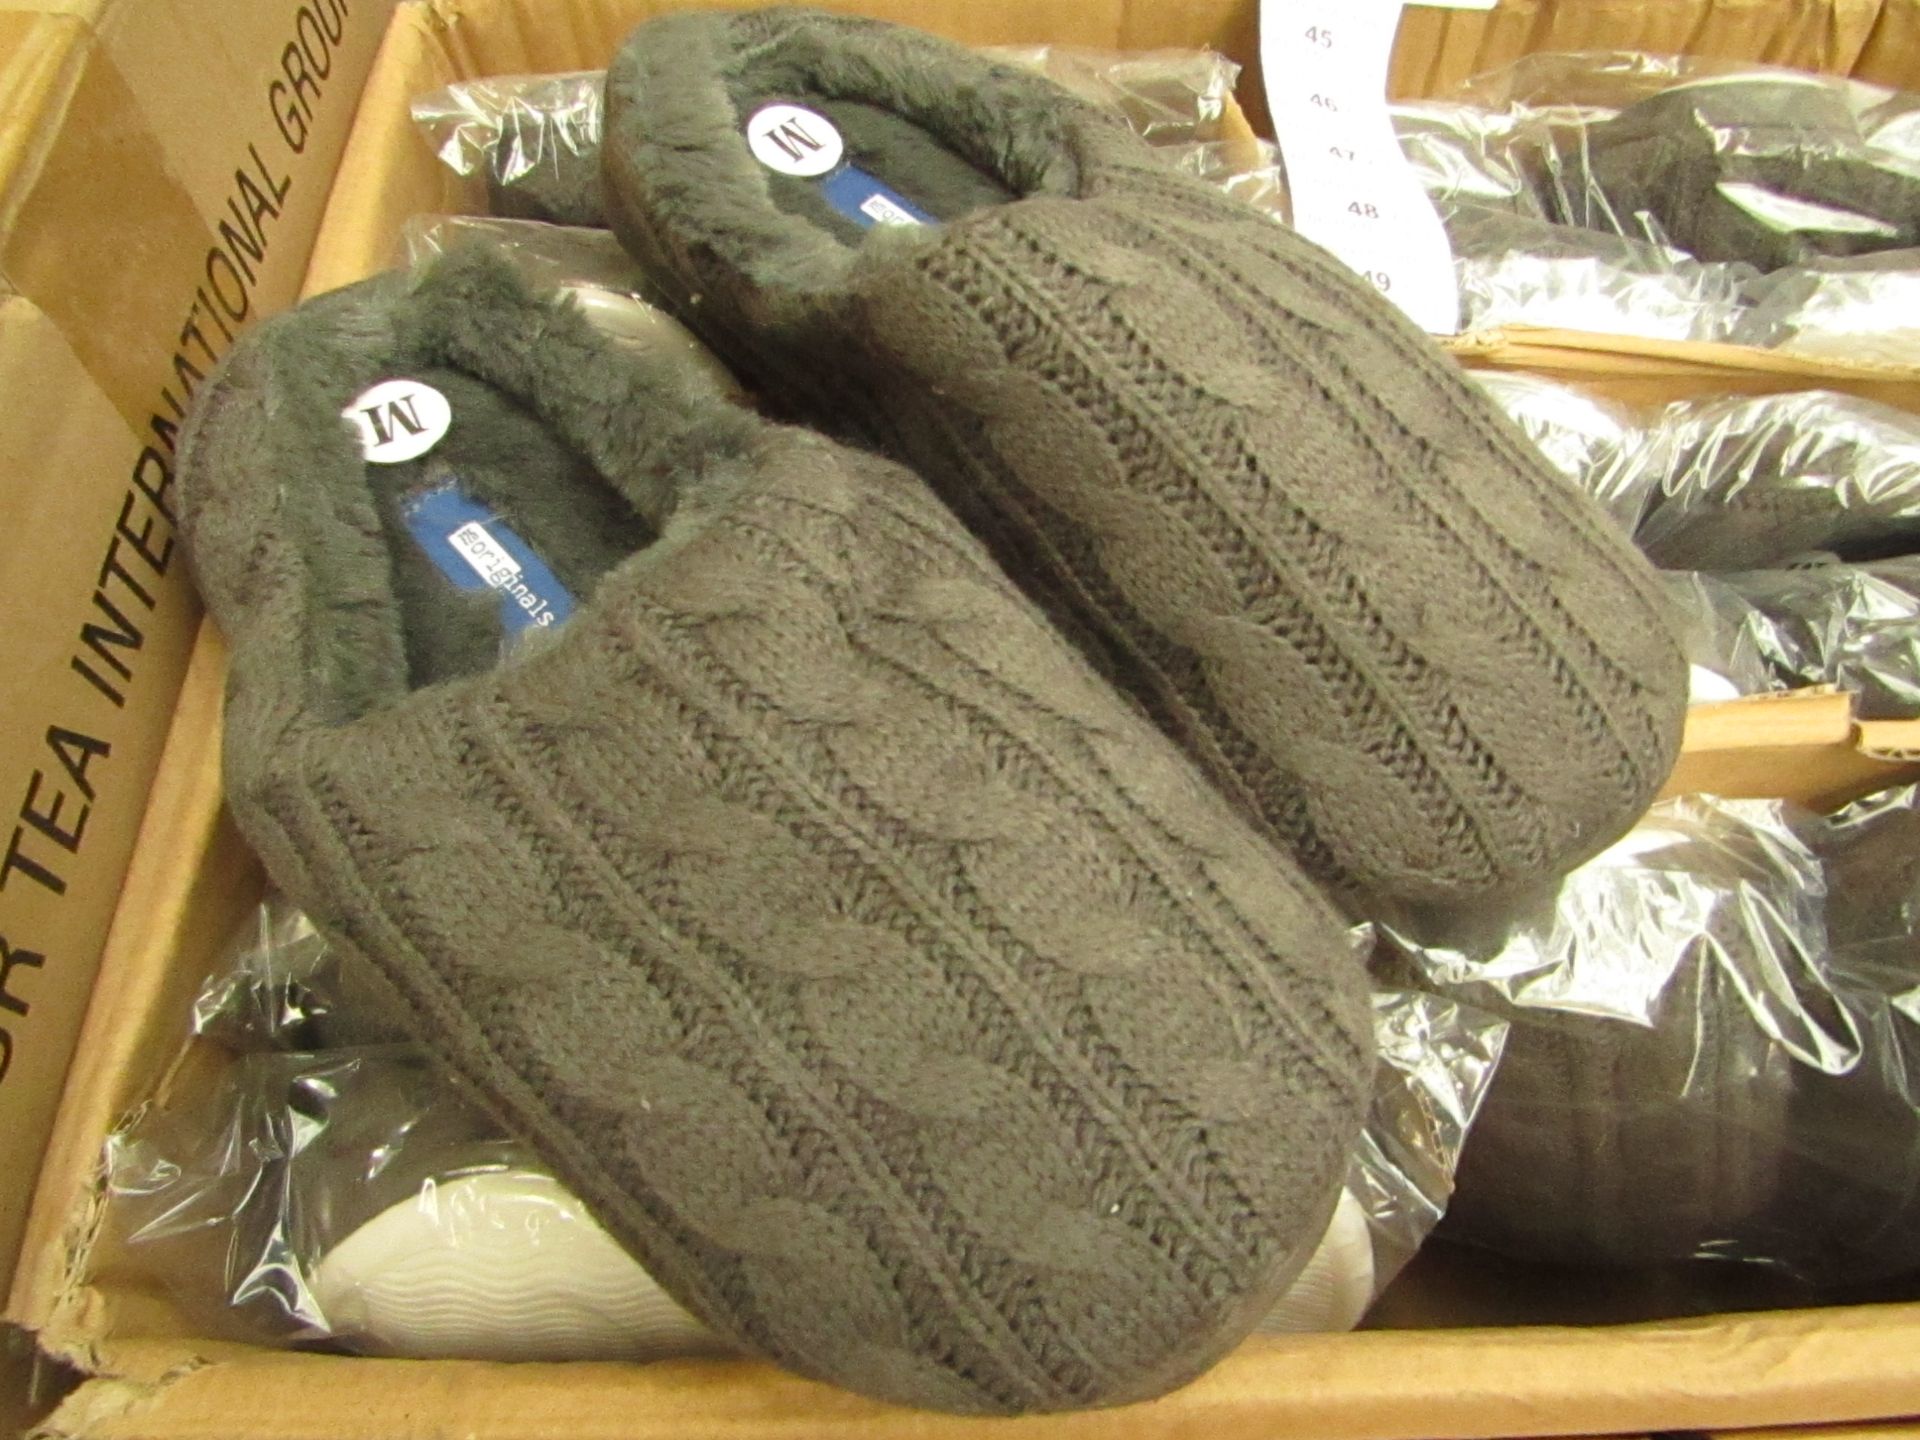 2x Packs of Unisex slippers, Brown Size Medium, all new and packaged.